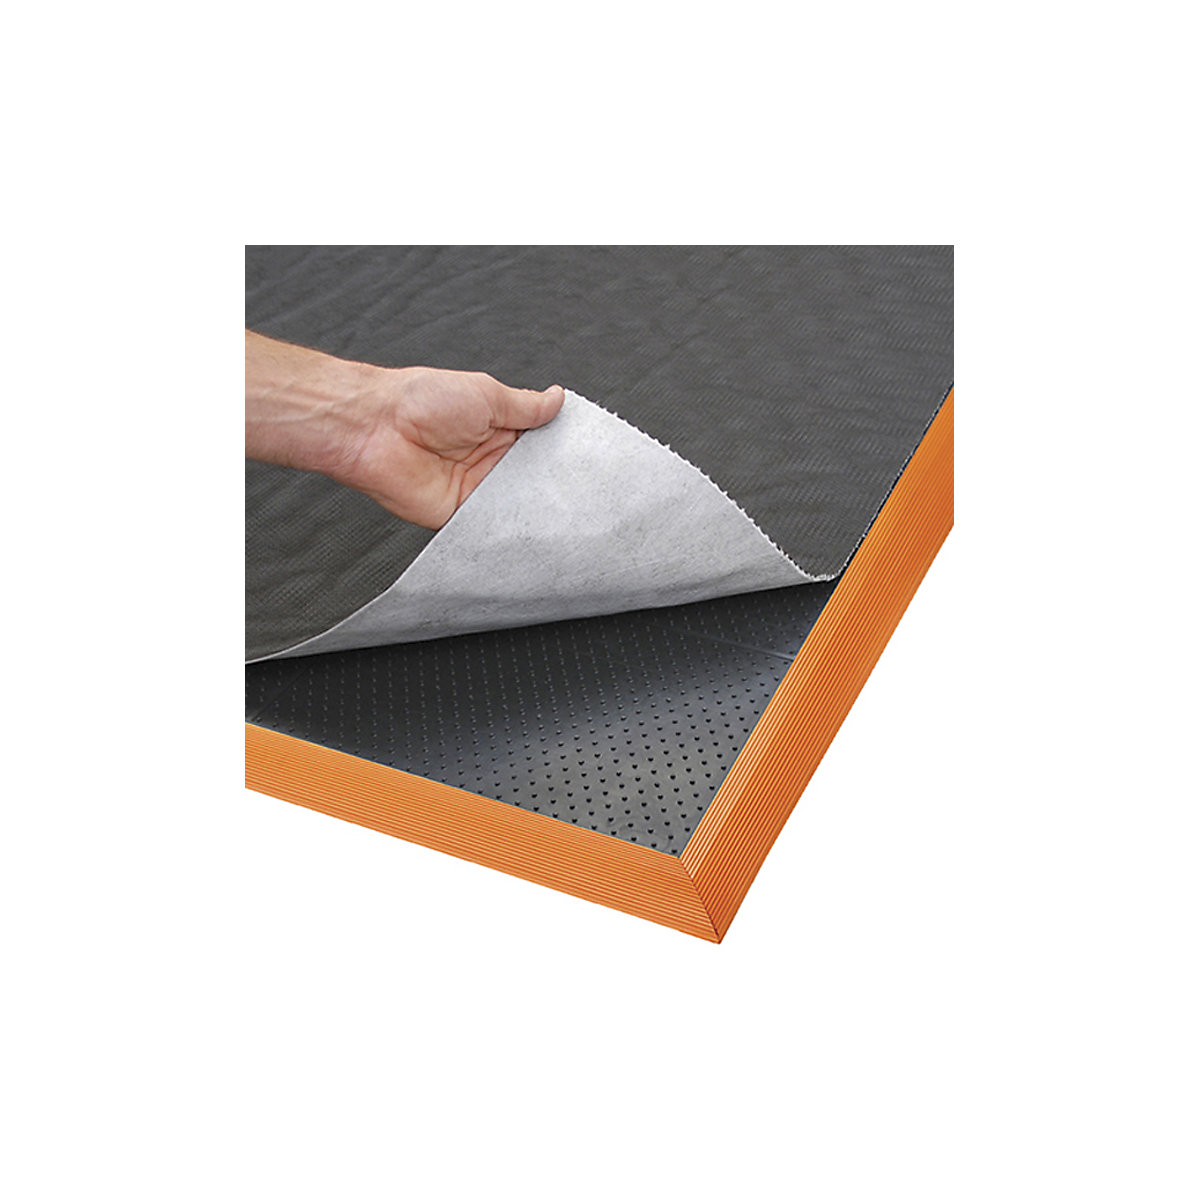 Sorb Stance™ nitrile matting with fleece – NOTRAX